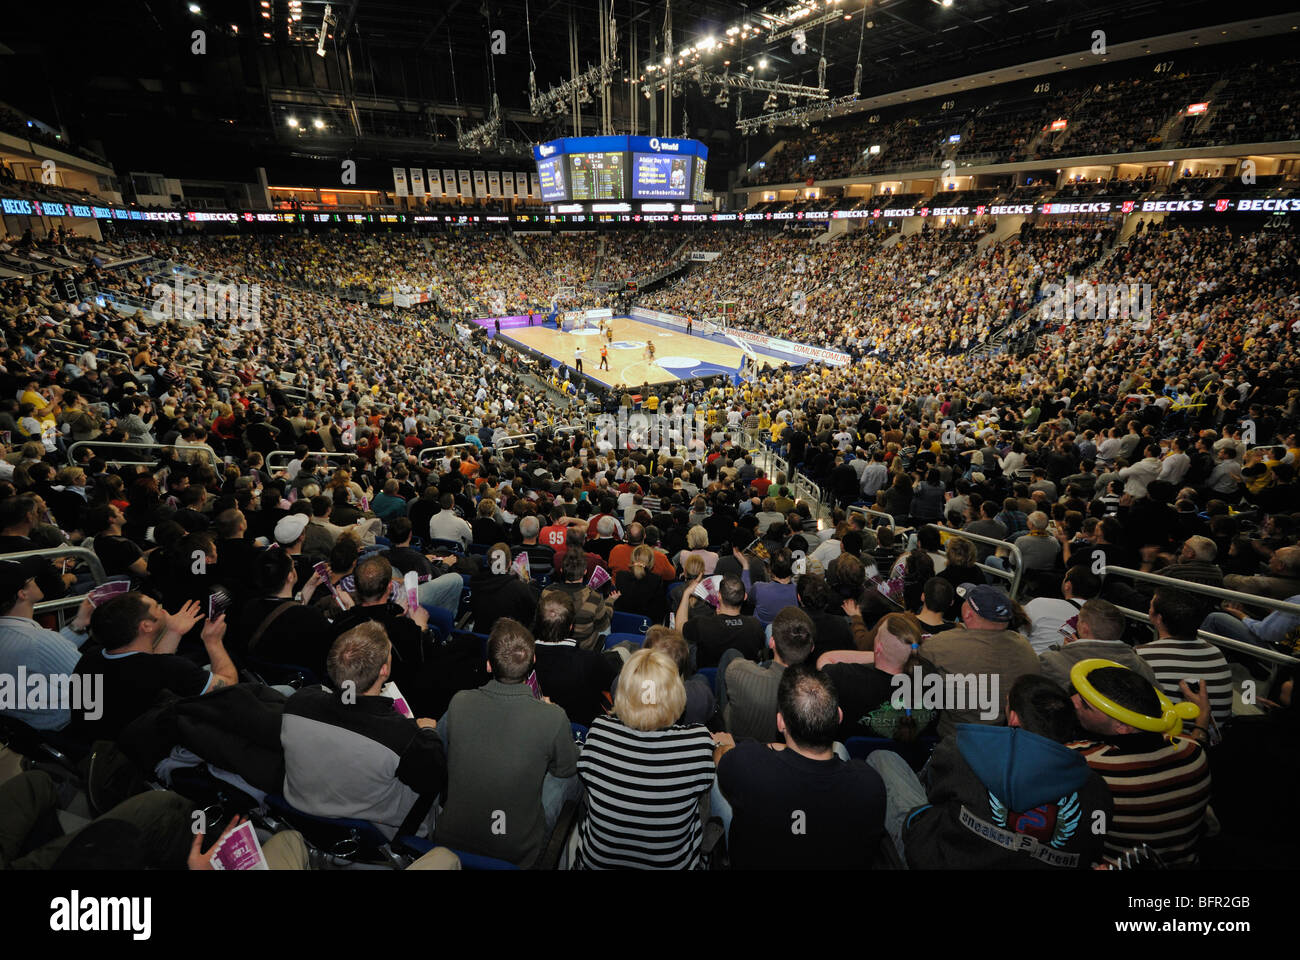 Basketball game of Alba Berlin. Interior of the O2 World, O2 Arena of the Anschutz Entertainment Group, Berlin, Germany, Europe. Stock Photo